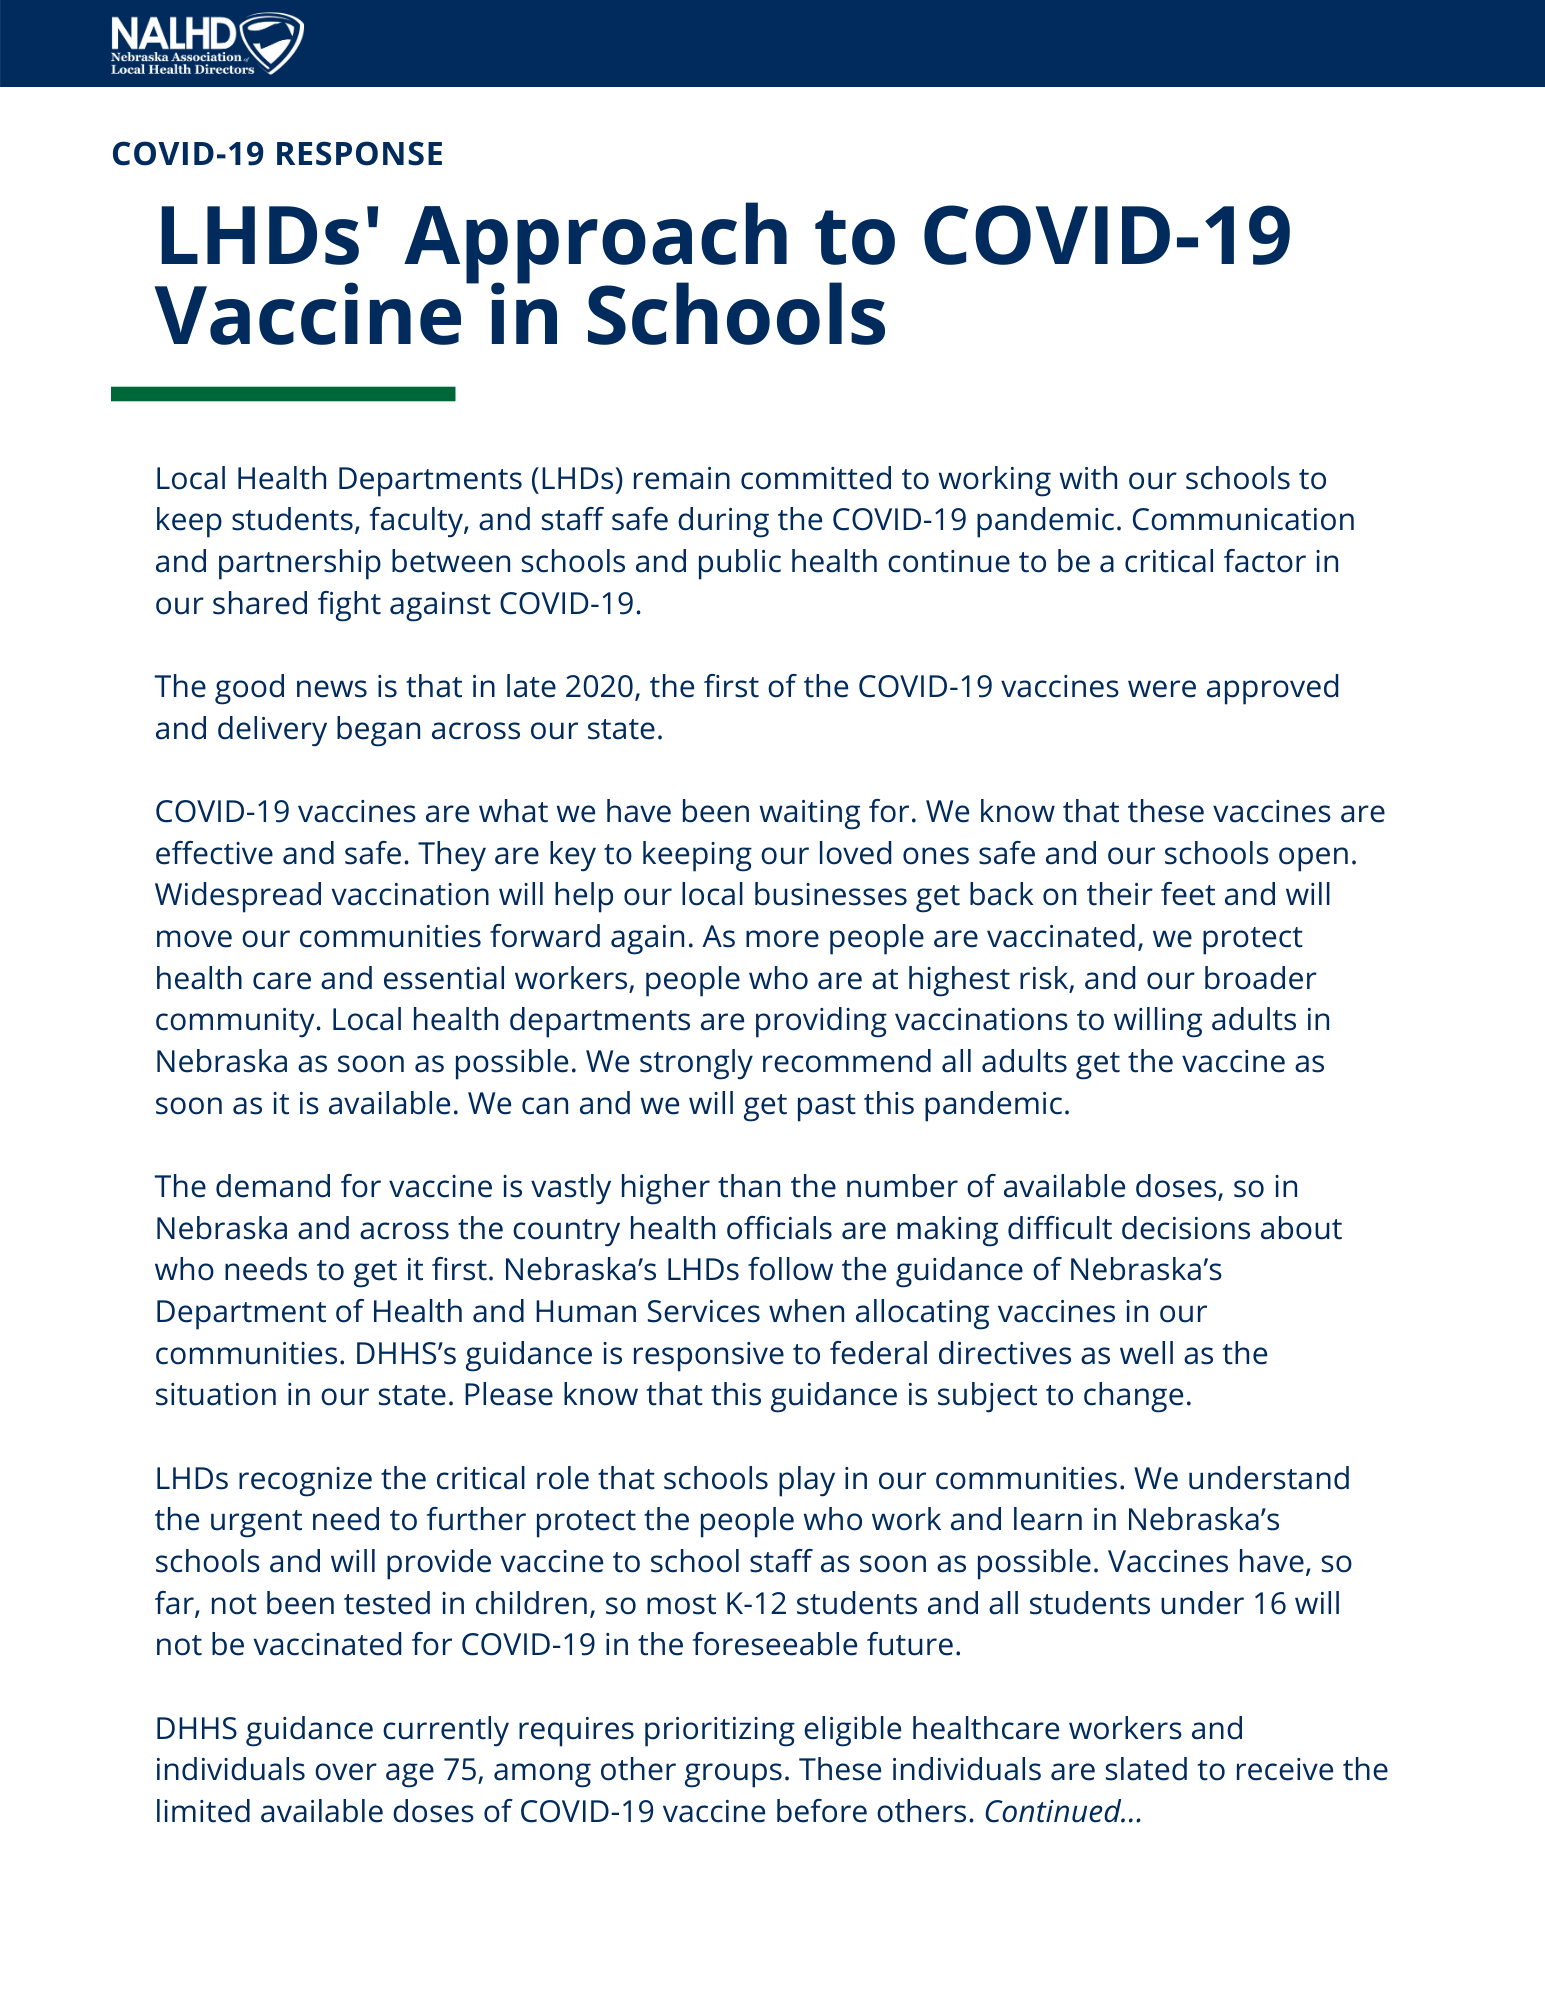 Approach to COVID-19 Vaccine in Schools